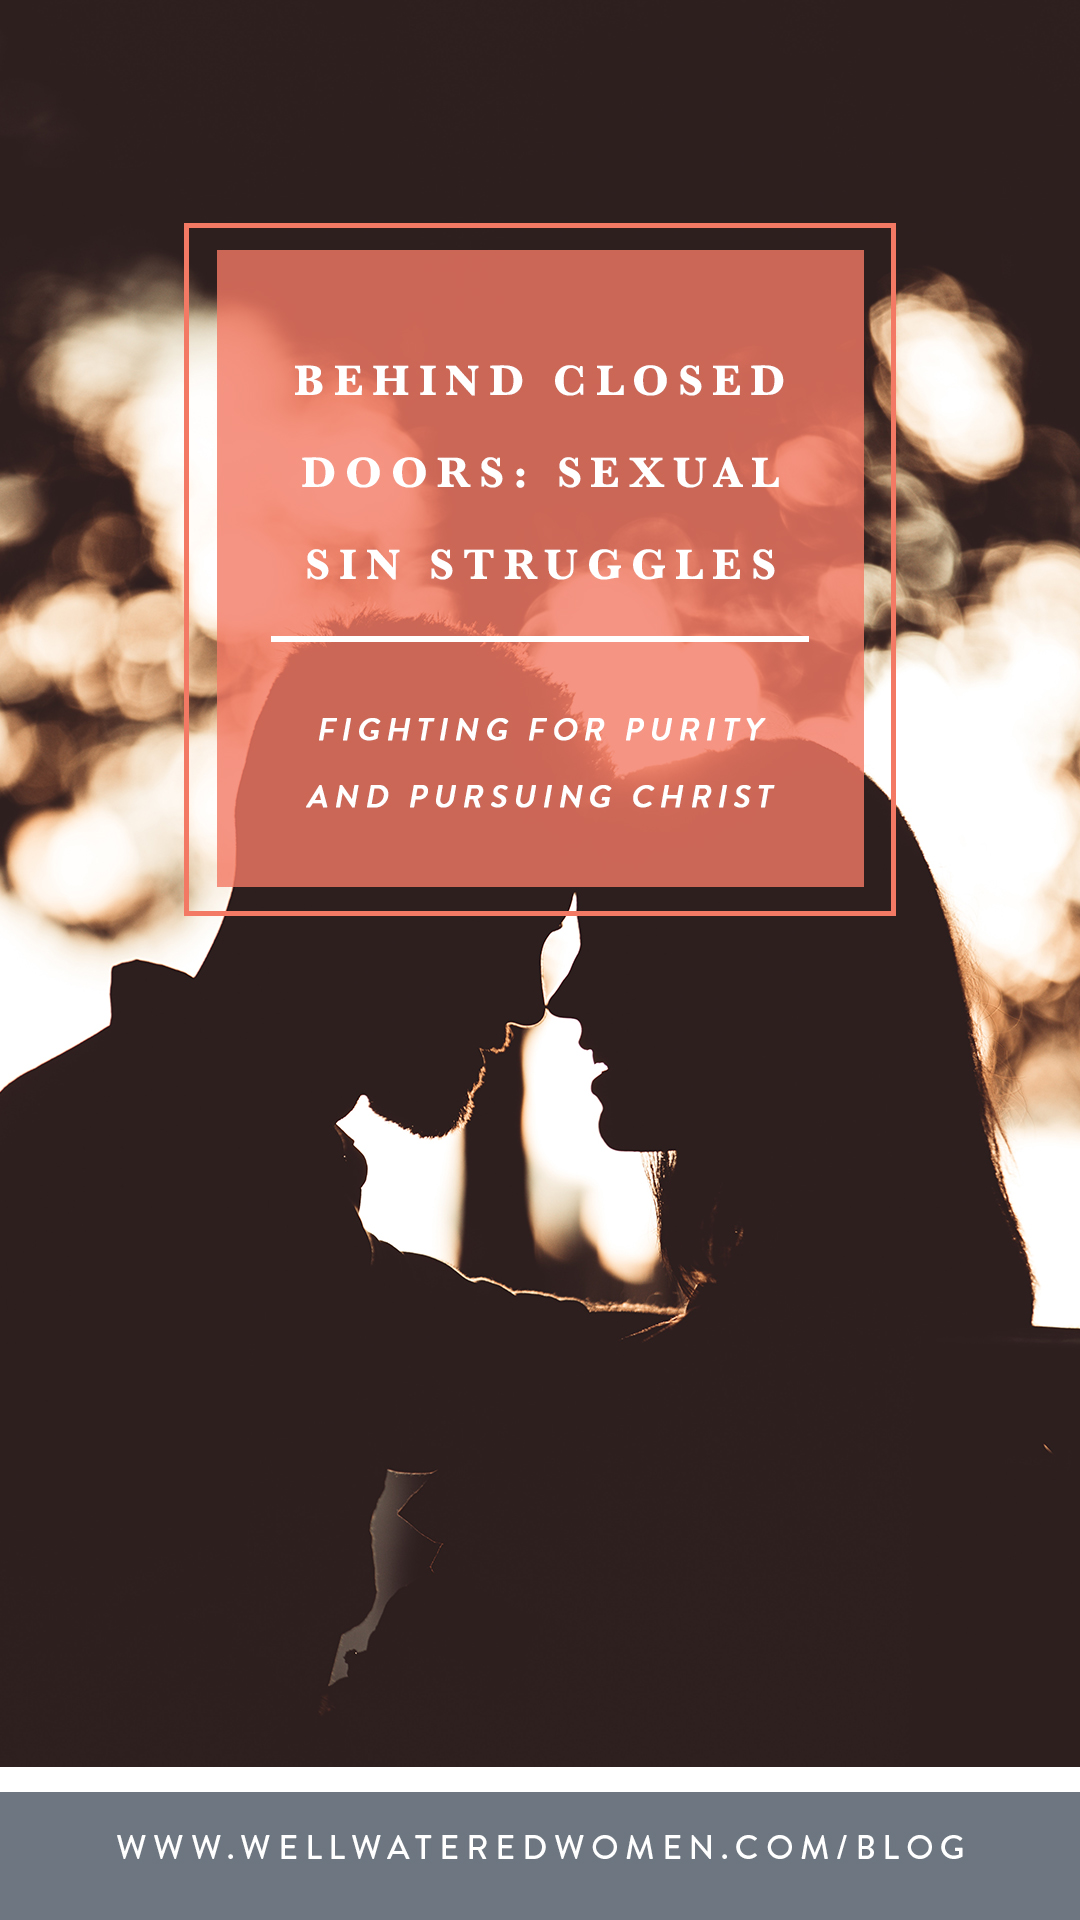 Behind Closed Doors-Sexual Sin Struggles-Pursuing Holiness-Well-Watered Women